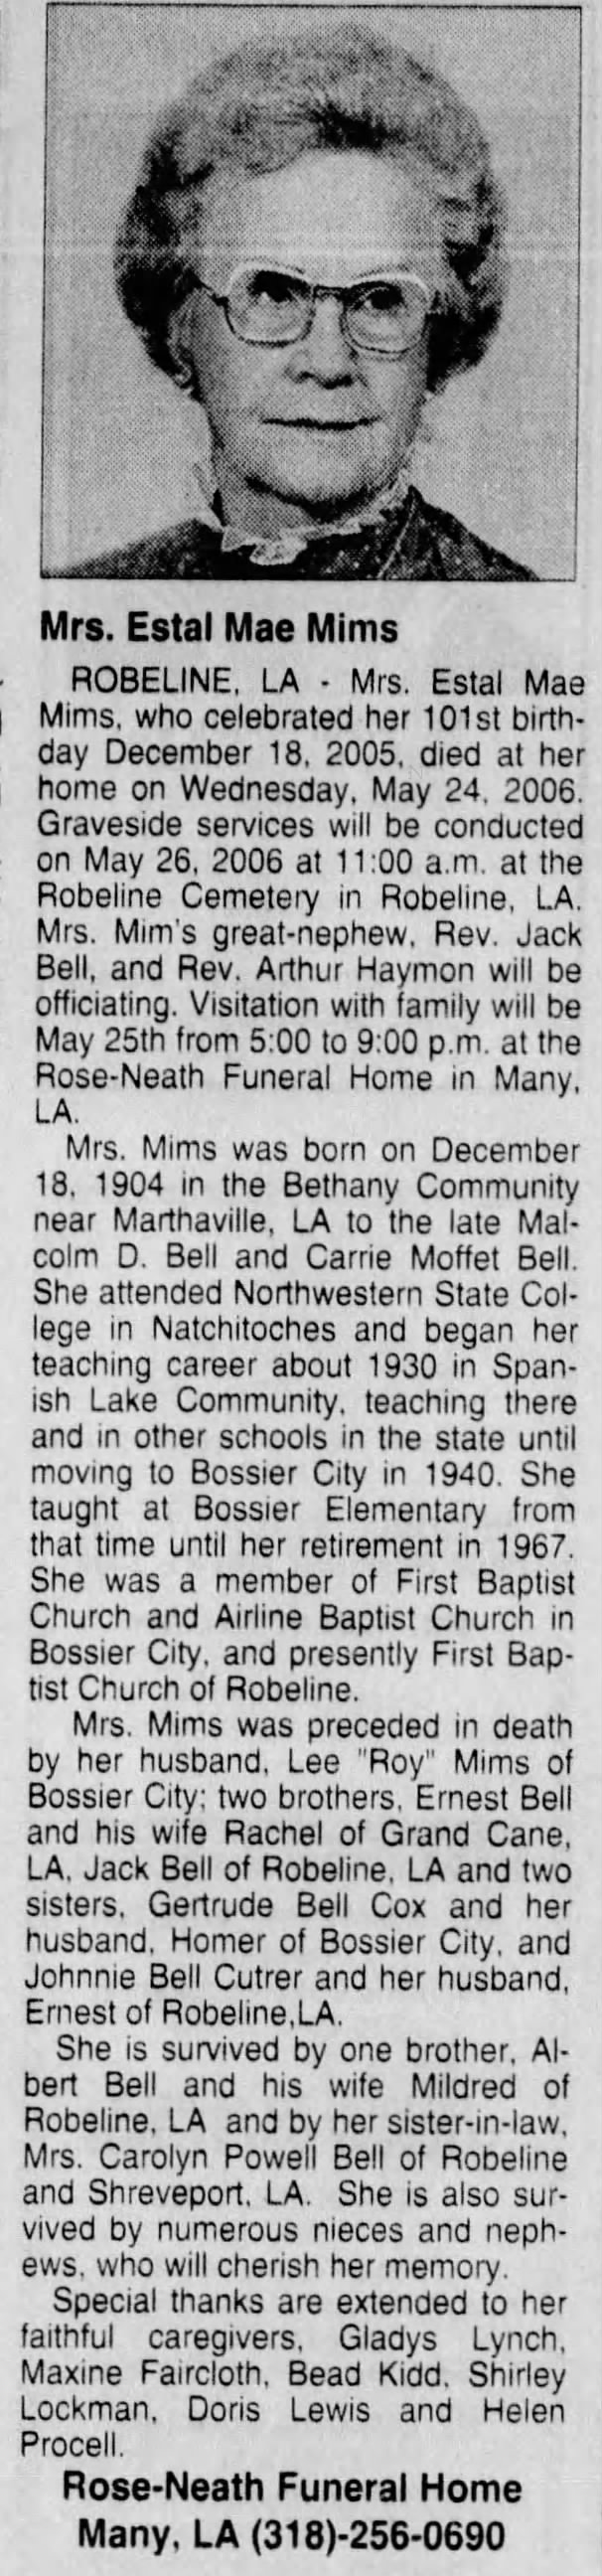 Obituary for Estal Bell Mims